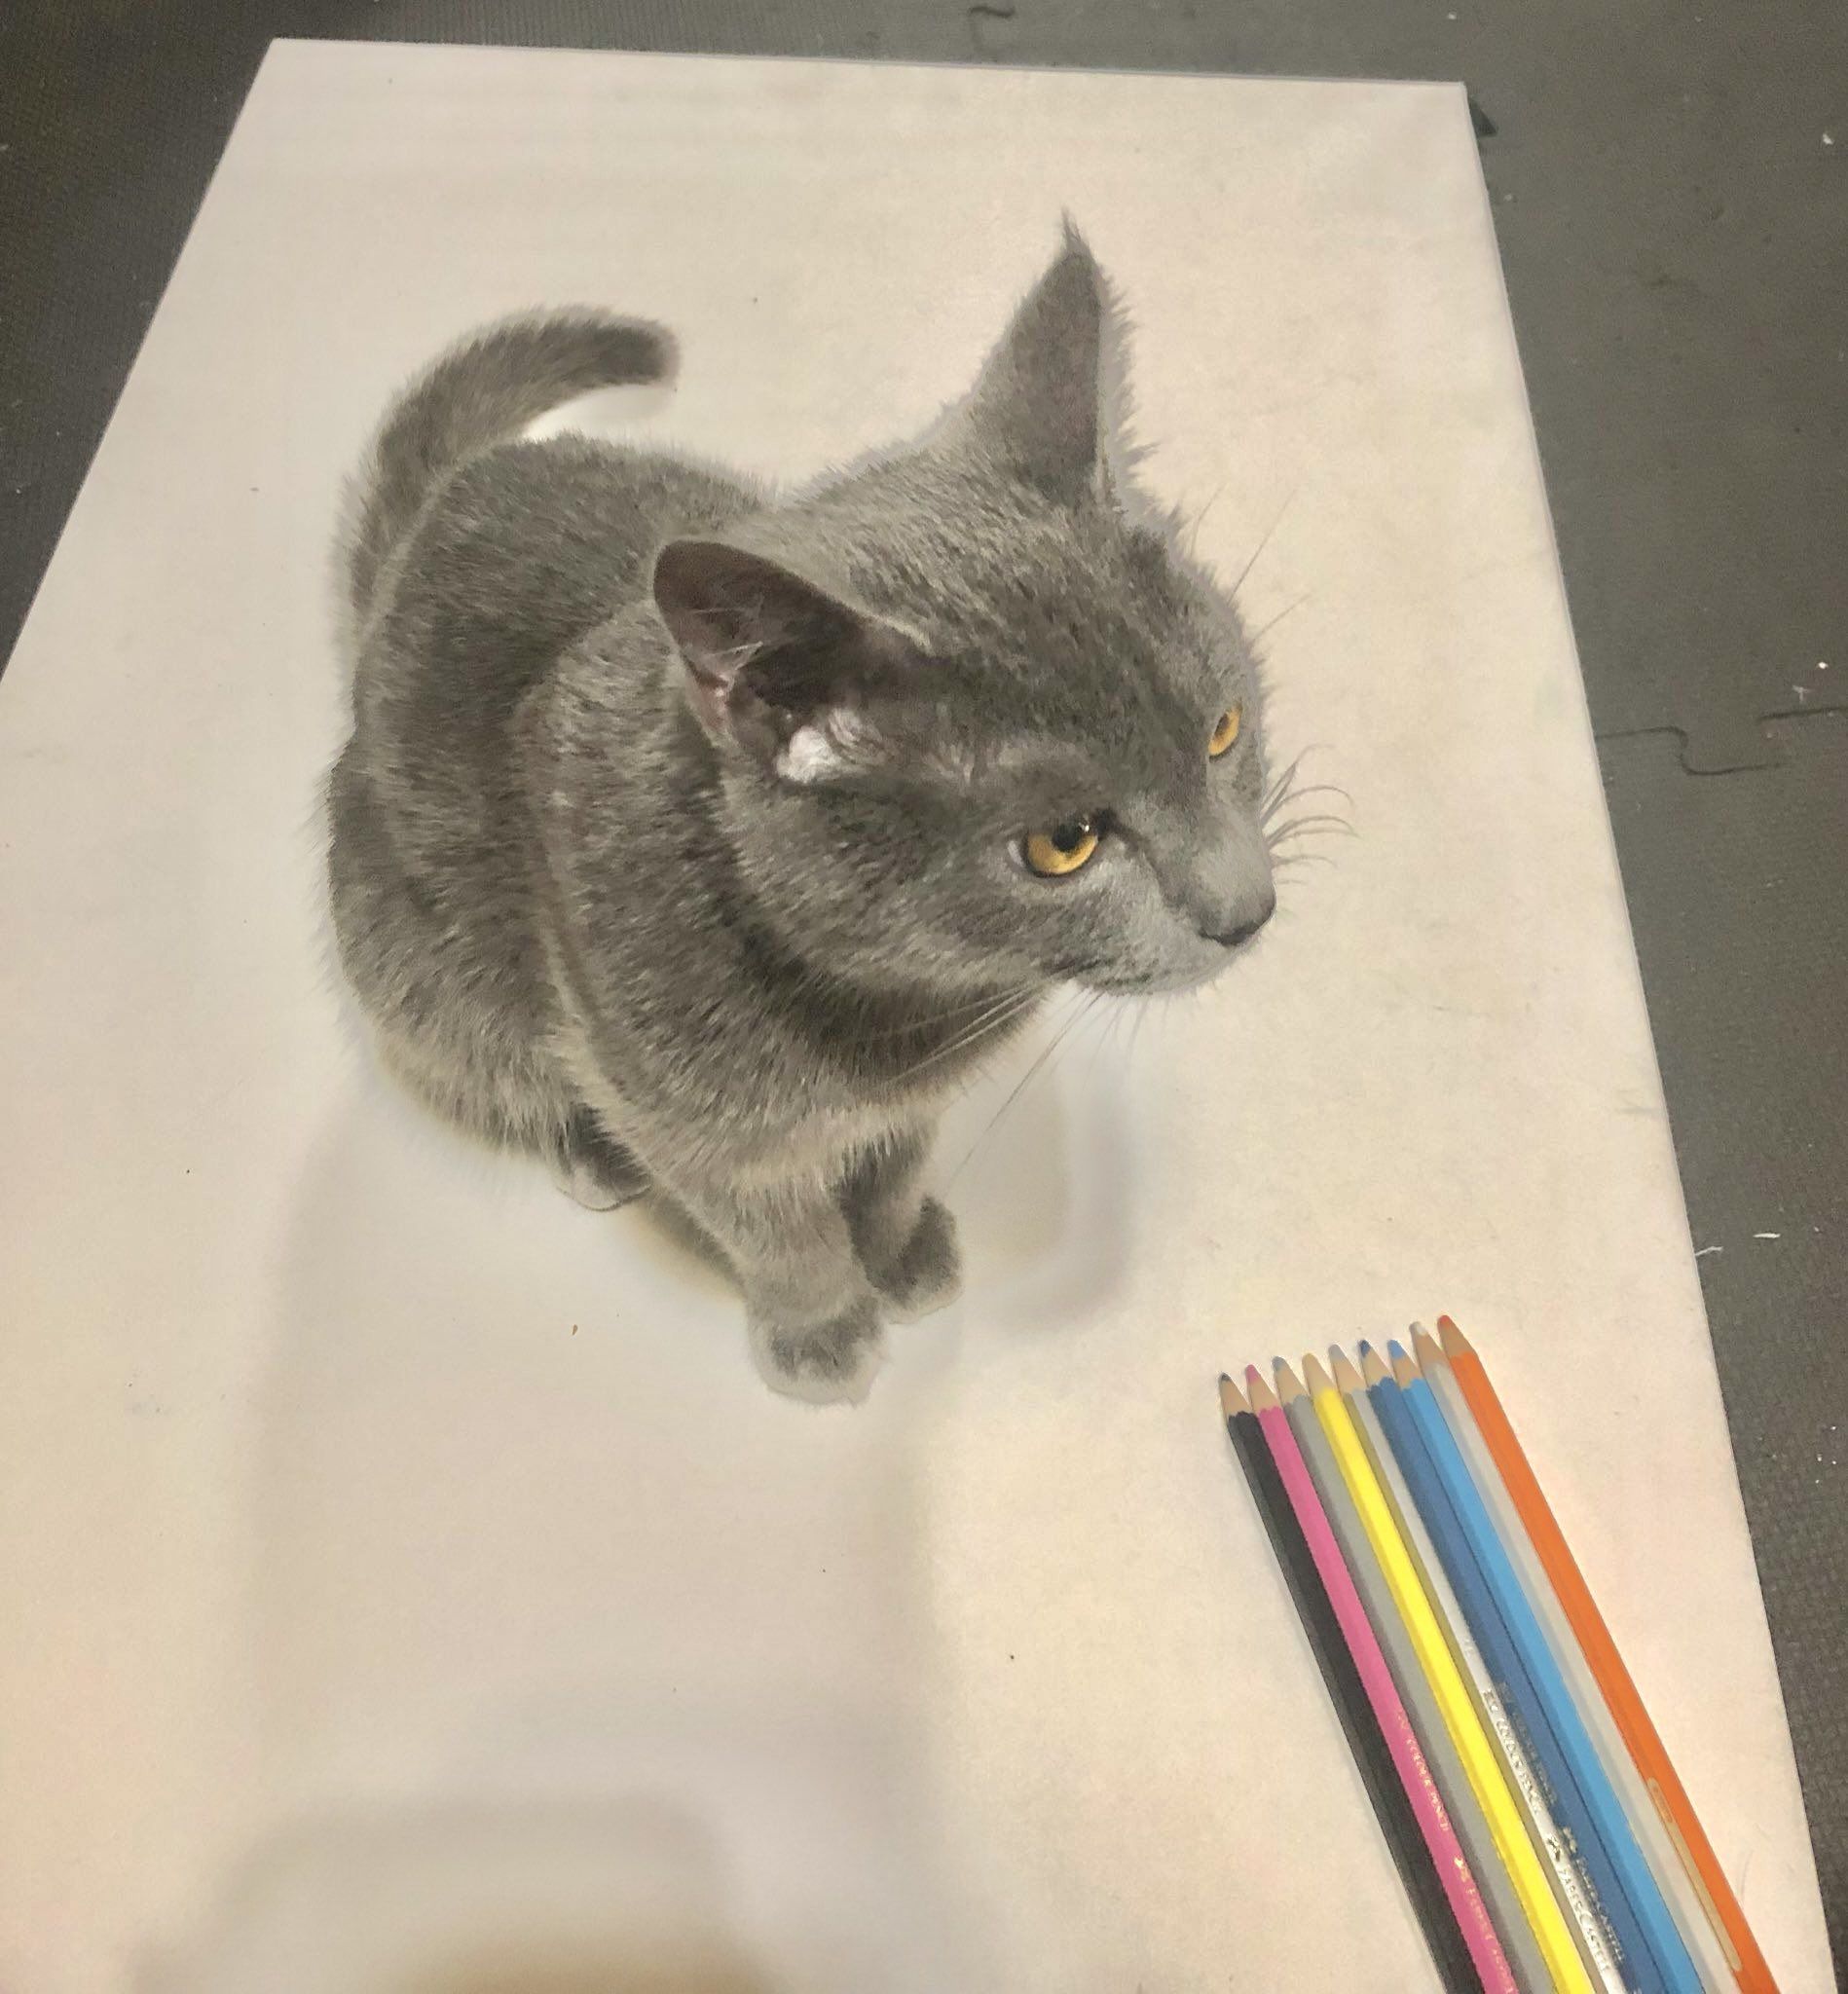 My cat on a piece of paper that looks like it was drawn with colored pencils.